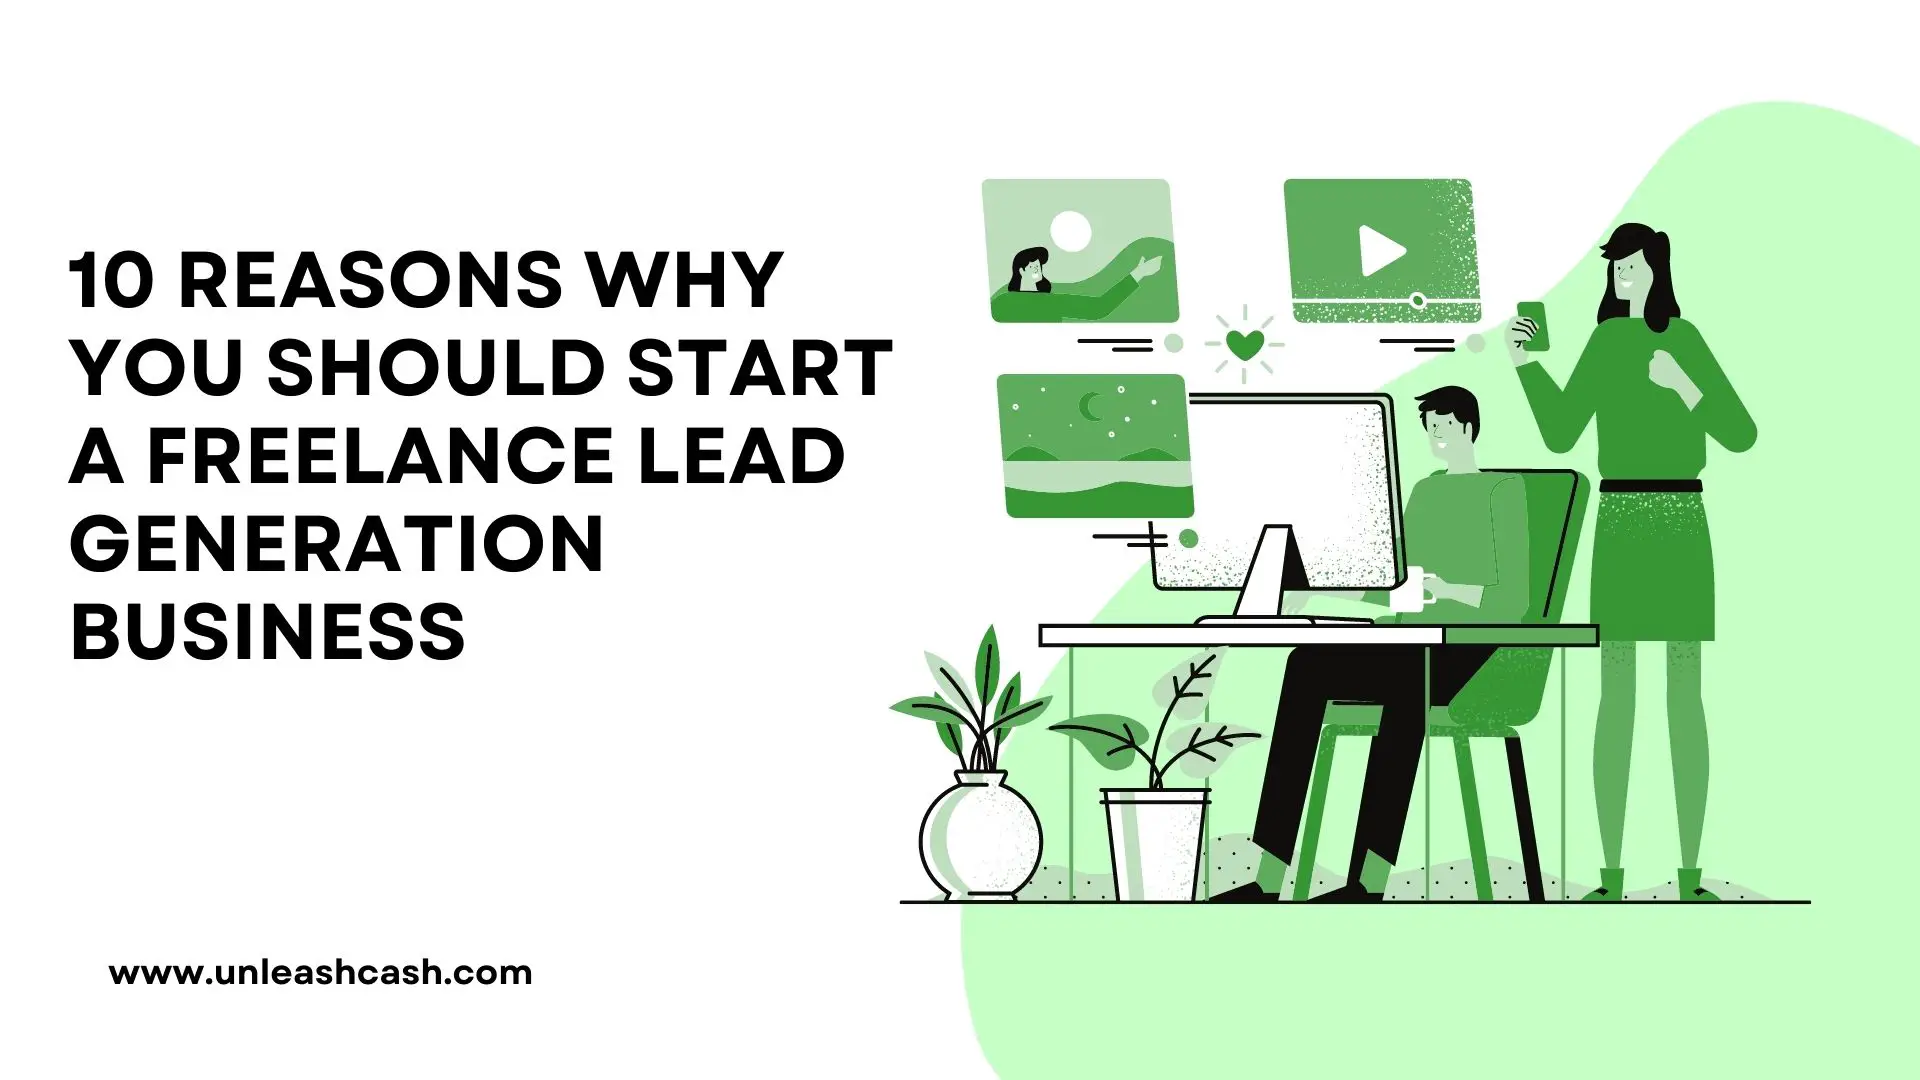 10 Reasons Why You Should Start A Freelance Lead Generation Business